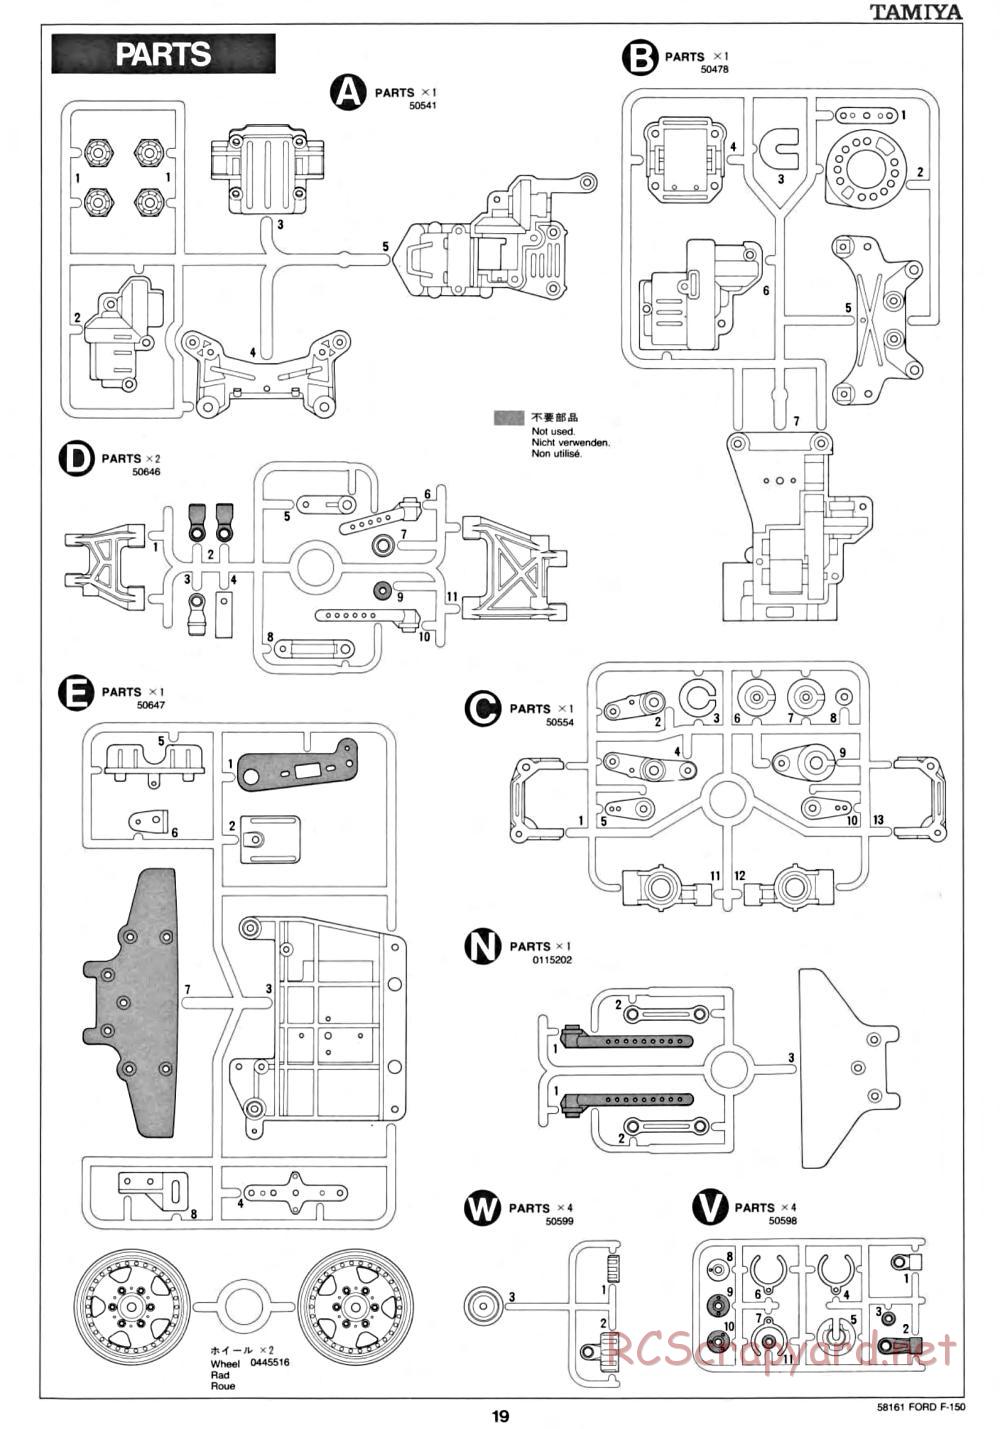 Tamiya - Ford F-150 Truck Chassis - Manual - Page 19